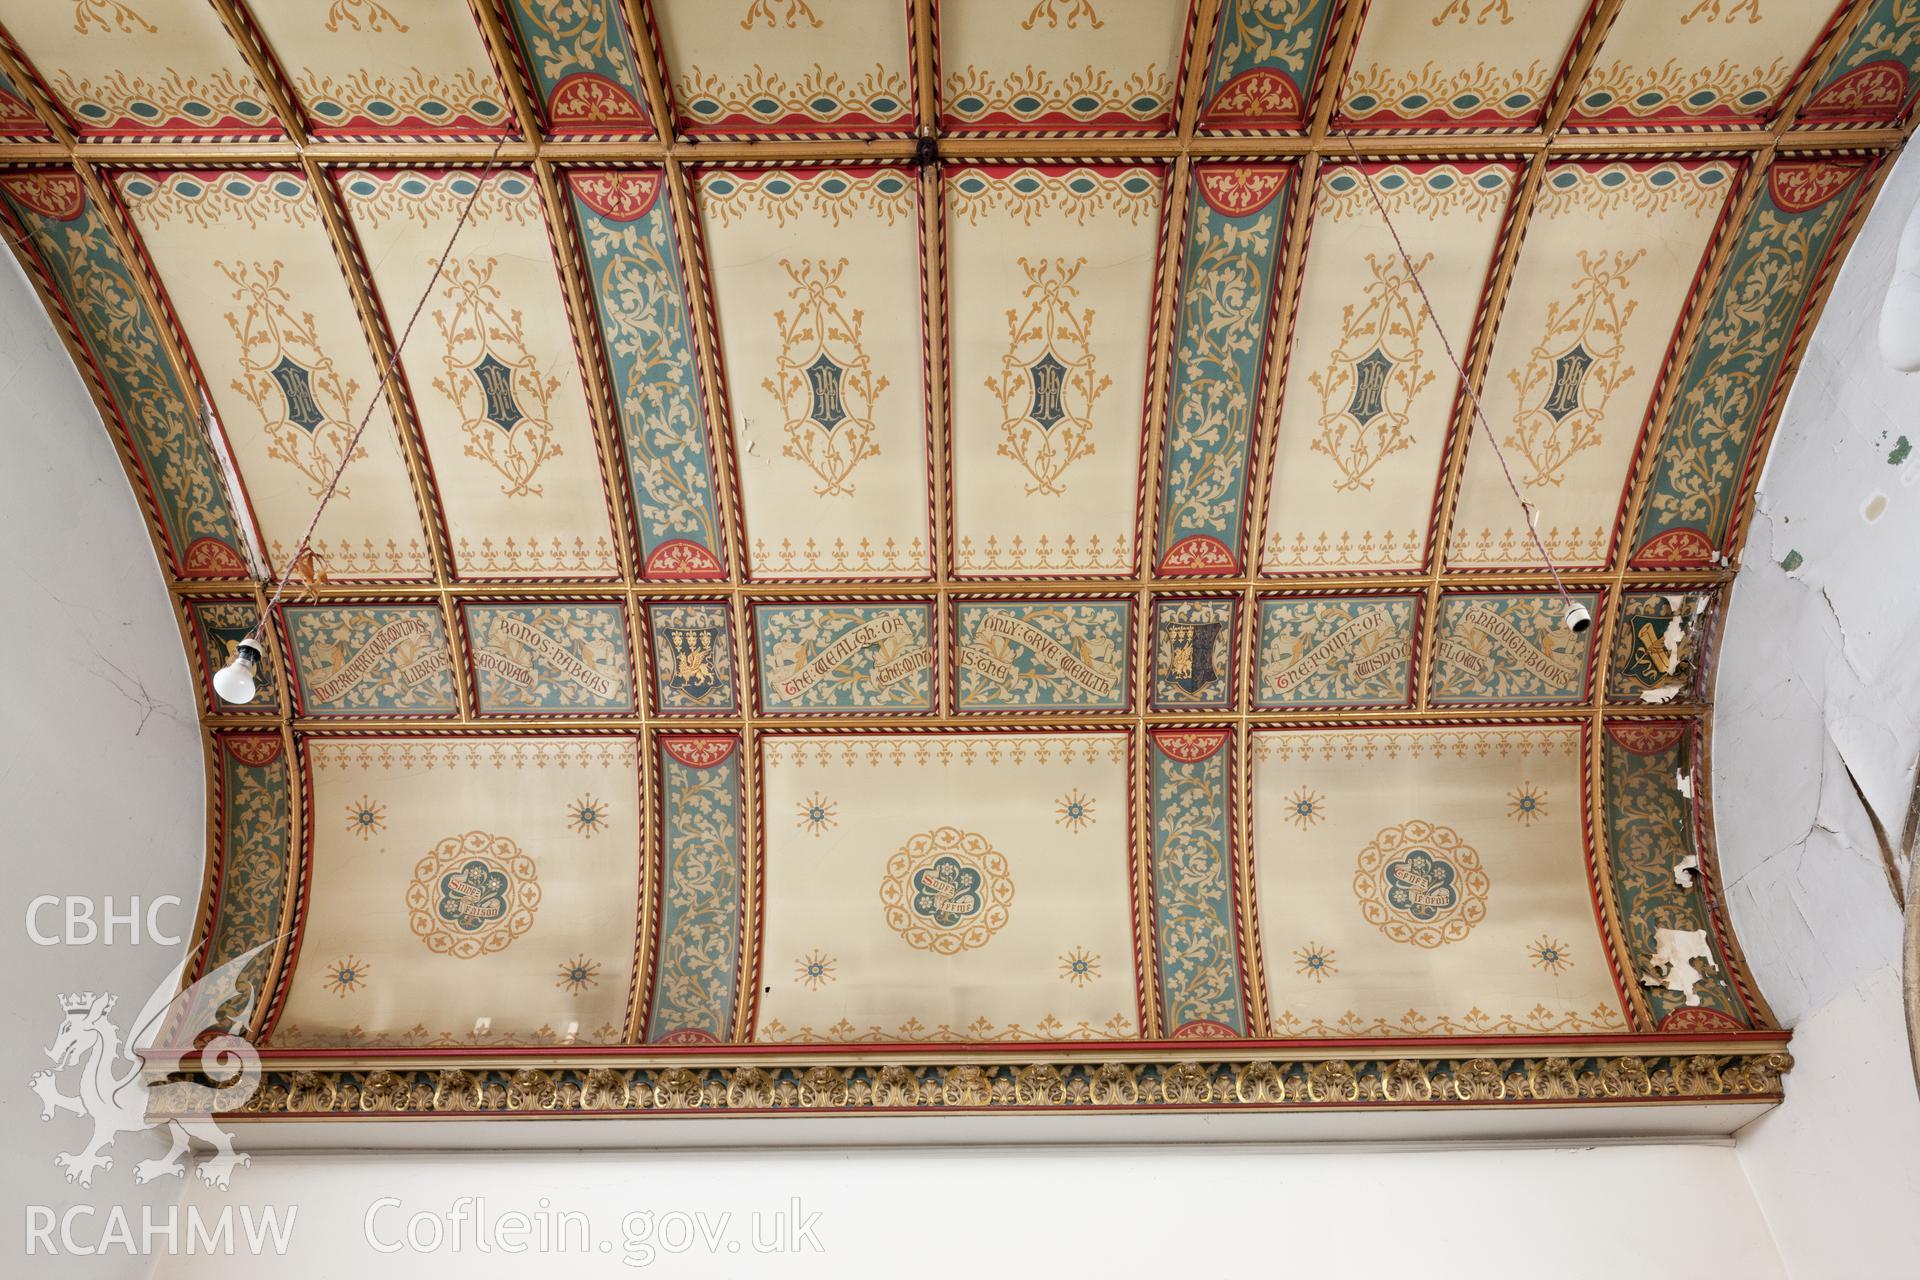 Detail of decorated ceiling